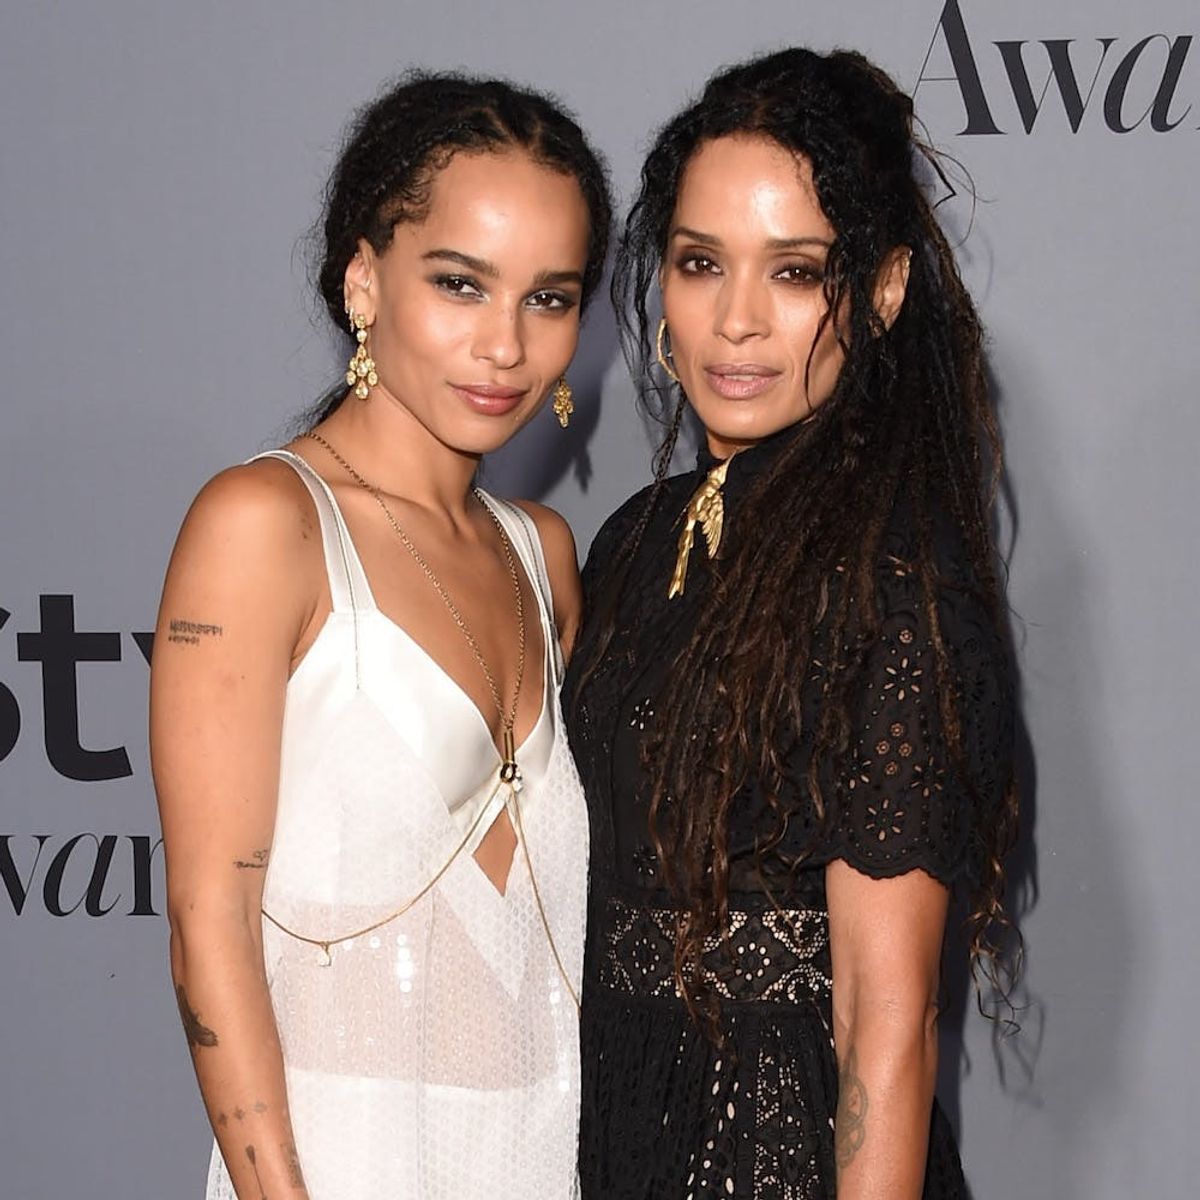 Zoë Kravitz Responded to Her + Her Mom’s Shout-out on Luke Cage in the Sweetest Way